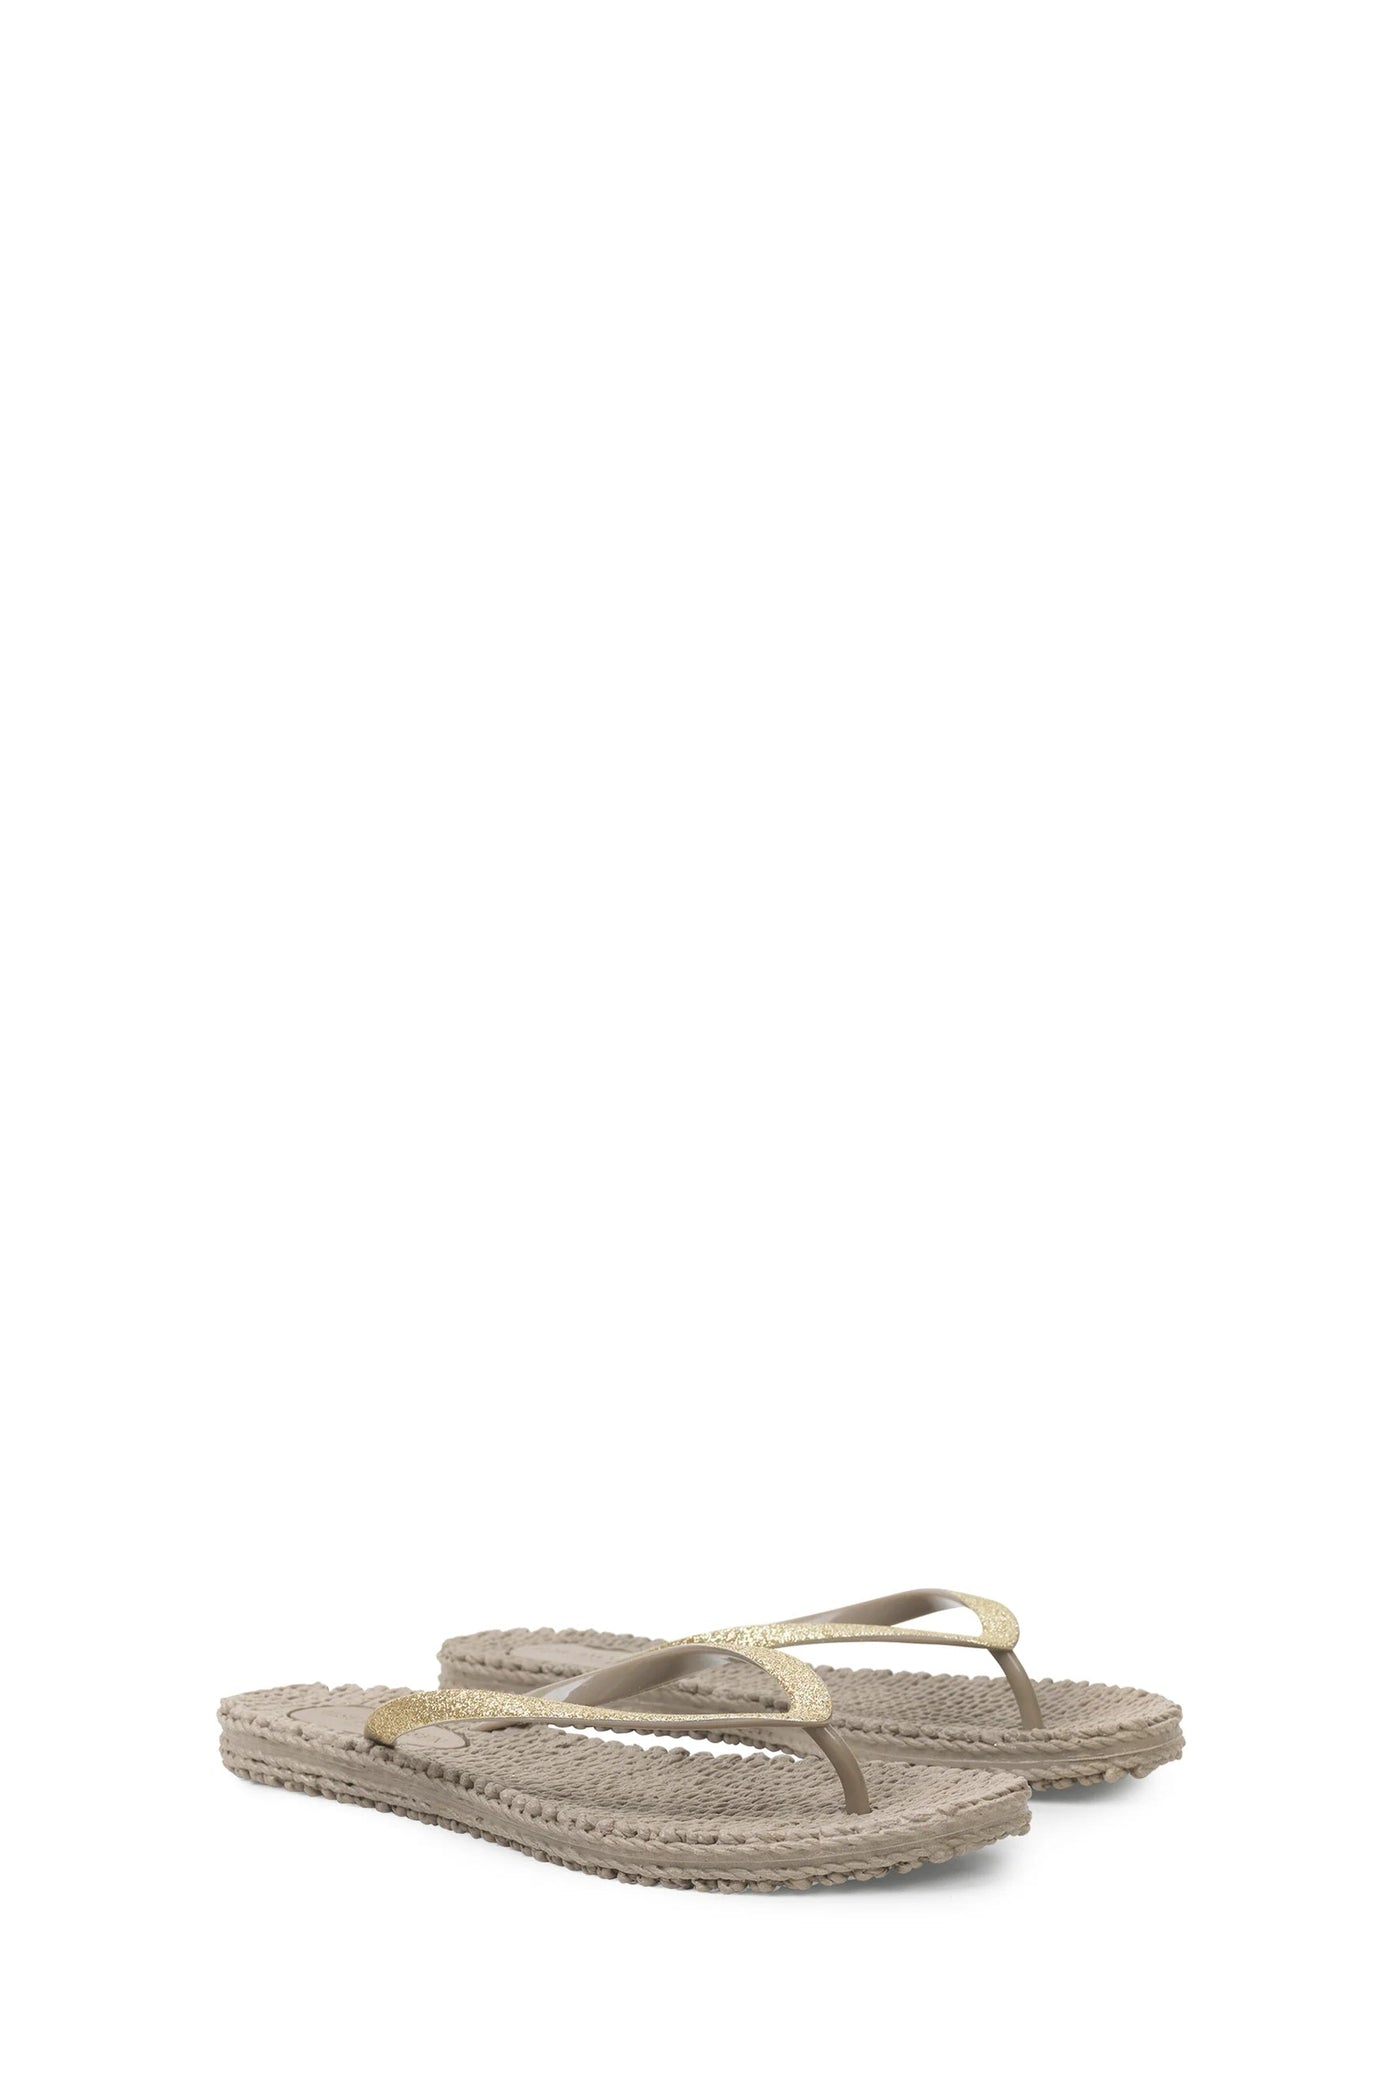 Ilse Jacobsen Cheerful Flip Flops in Atmosphere with Glitter-Accessories-Ohh! By Gum - Shop Sustainable